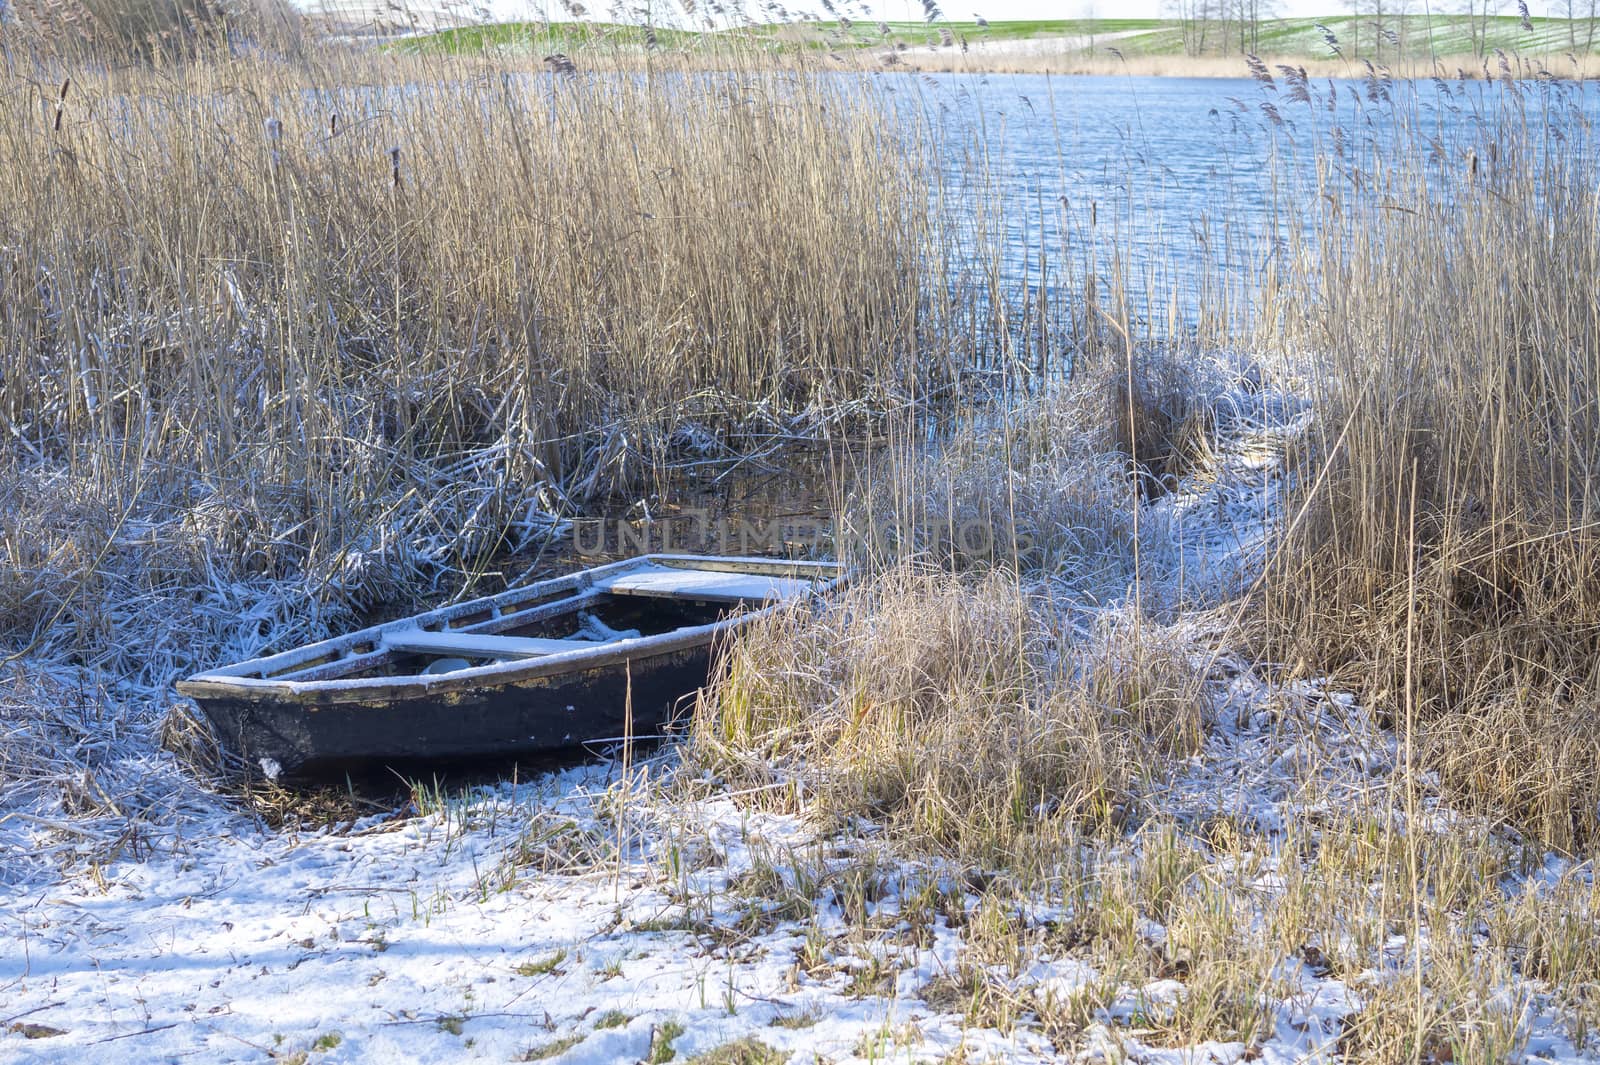 Old fishing boat among the reeds on the bank of a frozen river in winter, waiting on its time. Waiting for season concept